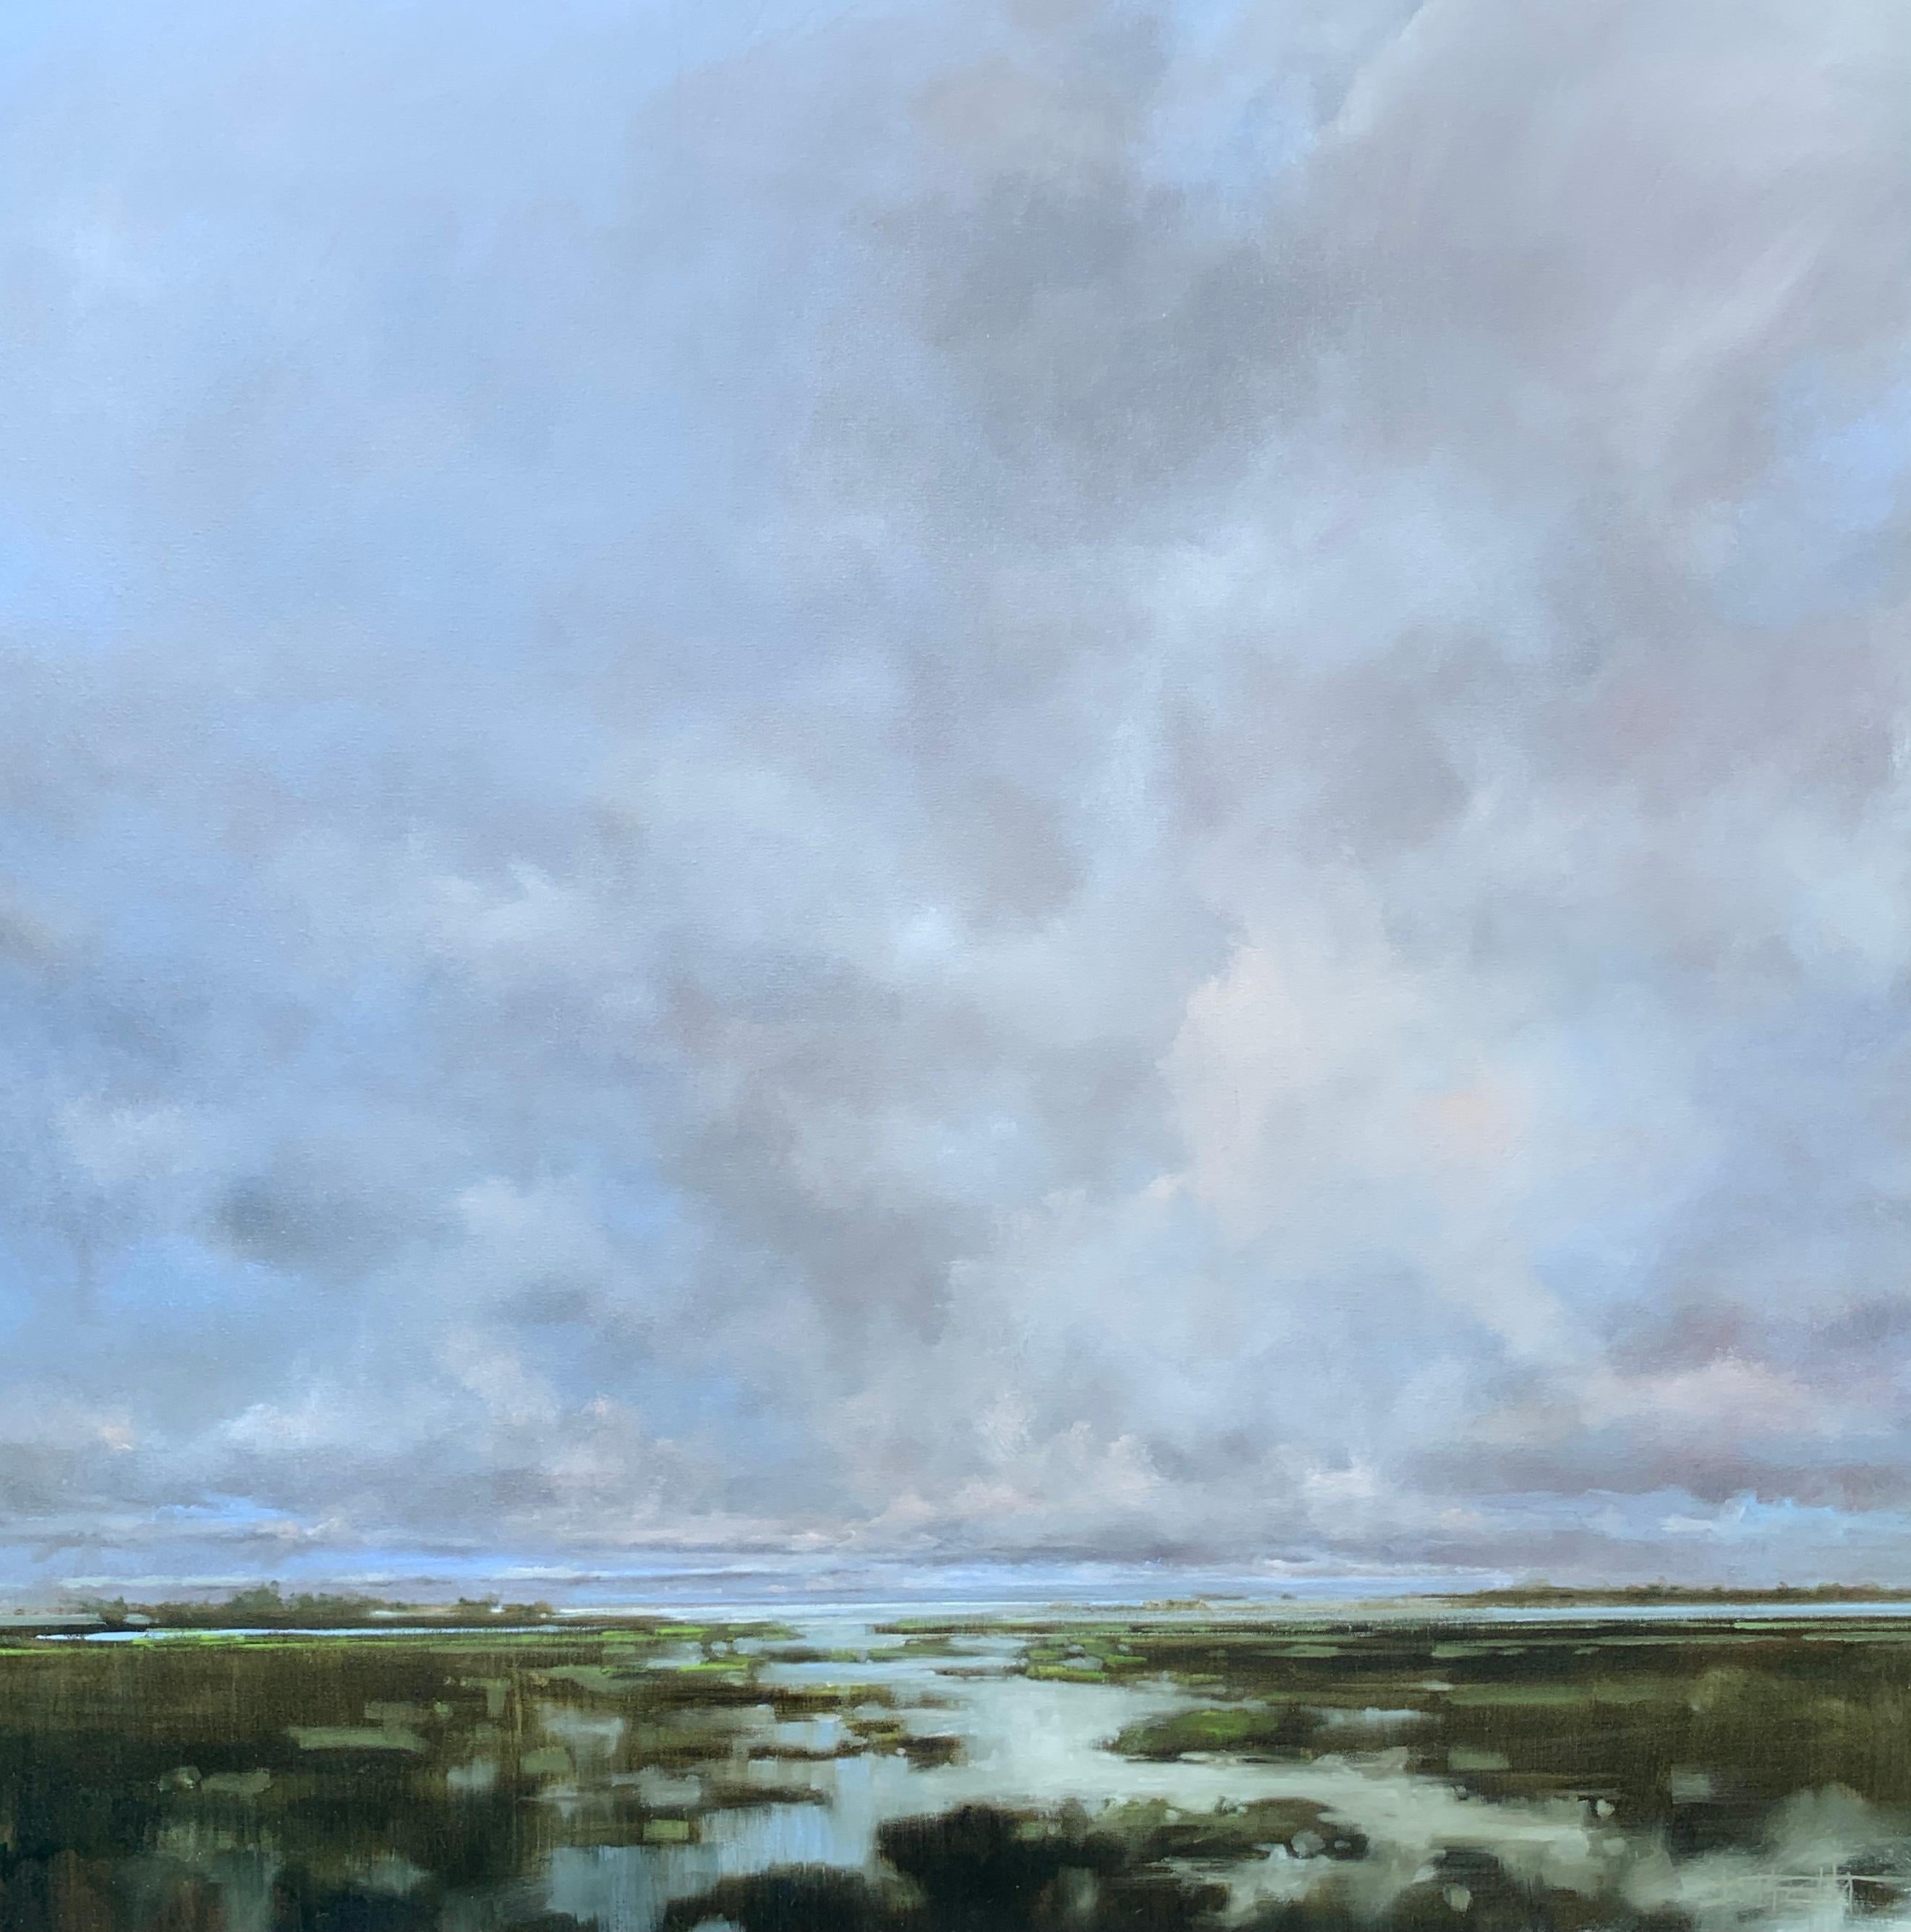 'If It Once Was Different, It Can Be Different Again' is a large contemporary oil on canvas landscape painting created by American artist Doug Foltz in 2021. Featuring a palette made of grey, blue, white and greens among other tones, the painting